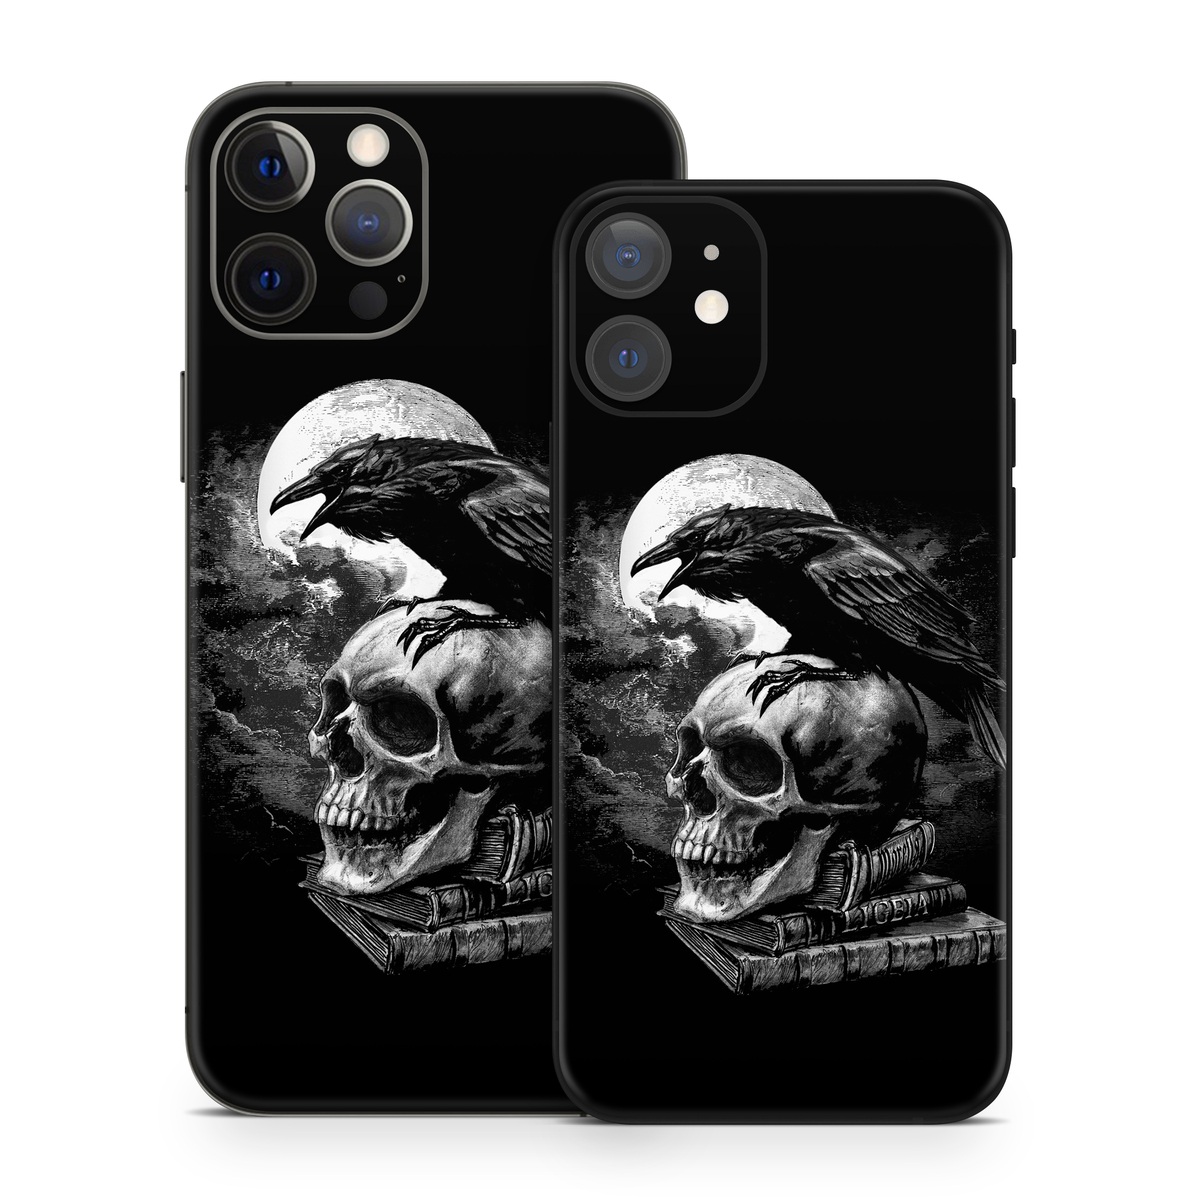 iPhone 12 Skin design of Bone, Skull, Bird, Darkness, Monochrome, Wing, Black-and-white, Illustration, Beak, Fictional Character, Drawing, Symbol, with black, white, gray colors